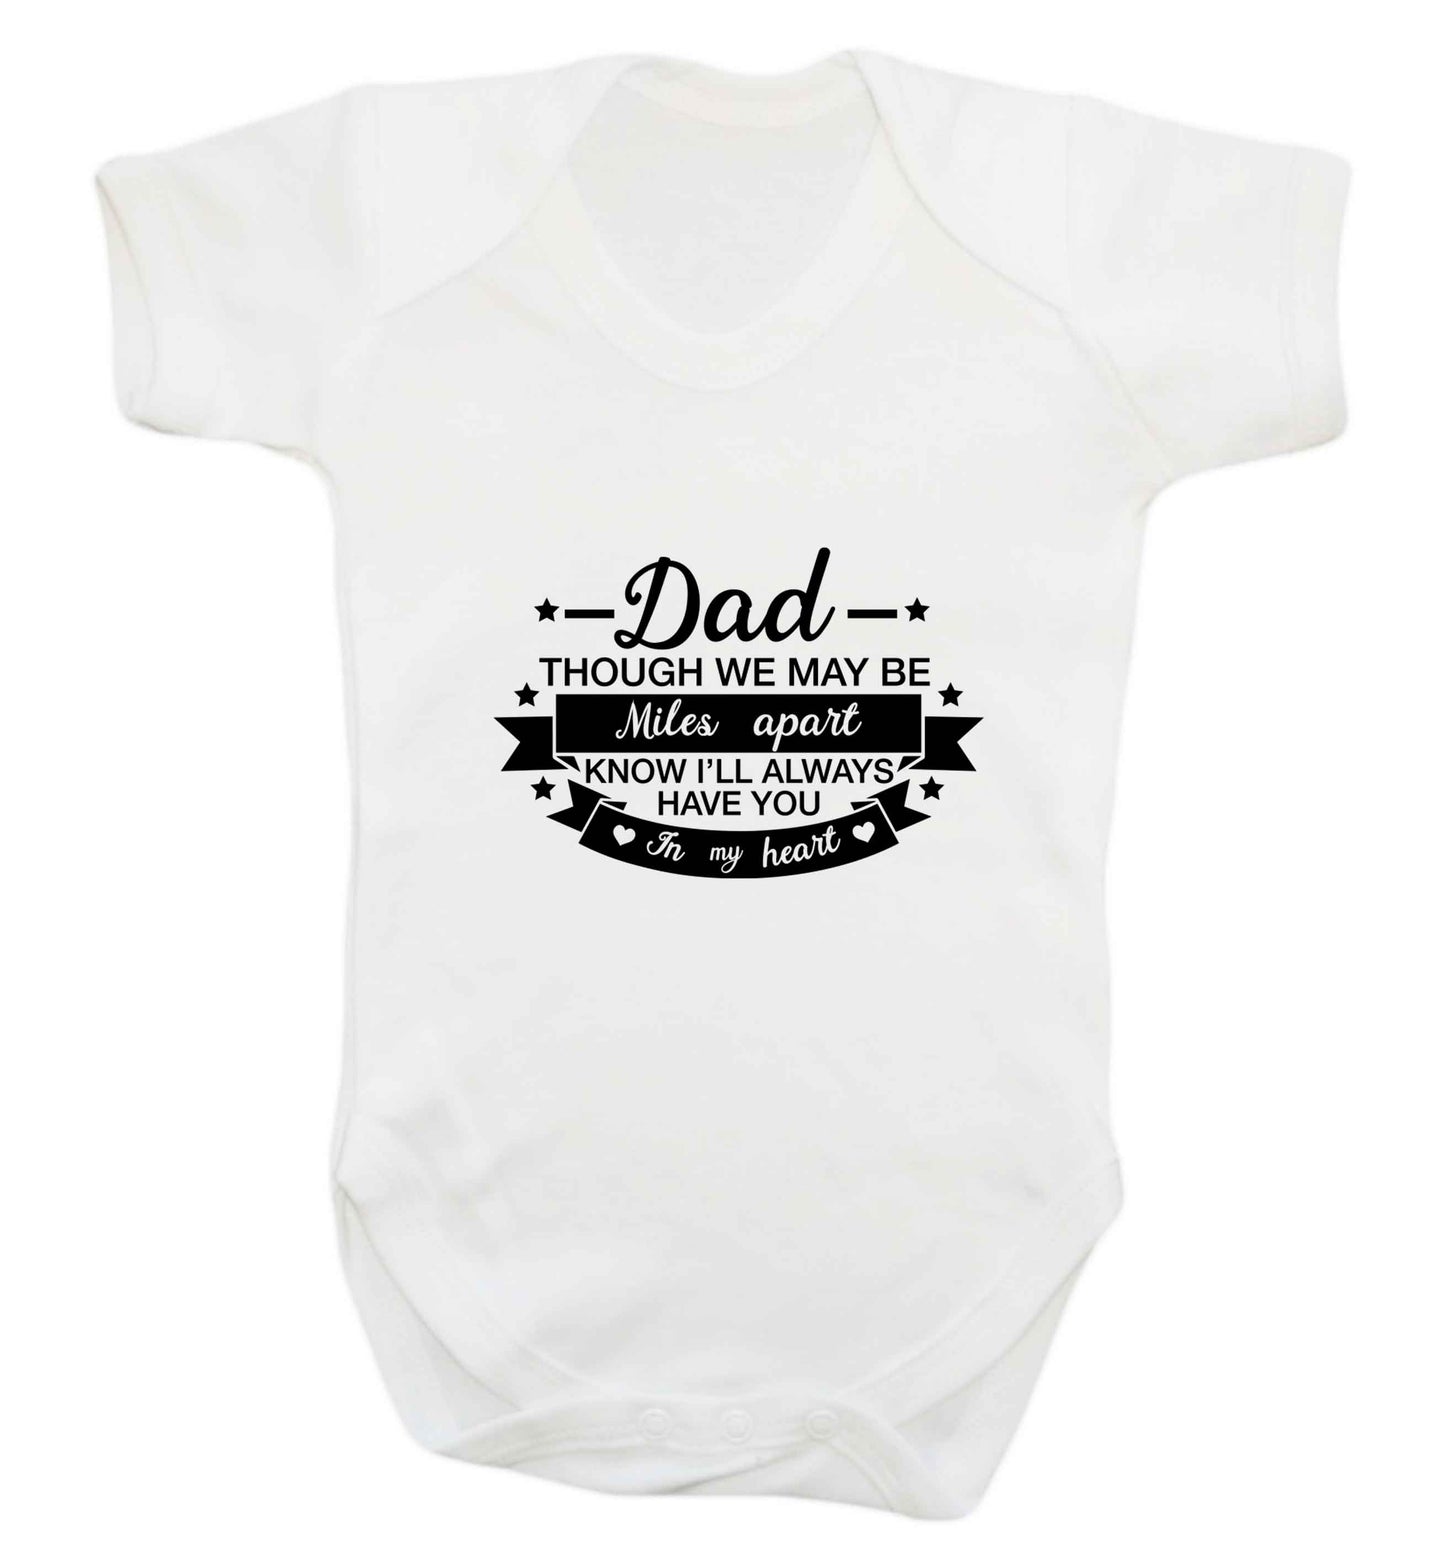 Dad though we are miles apart know I'll always have you in my heart baby vest white 18-24 months